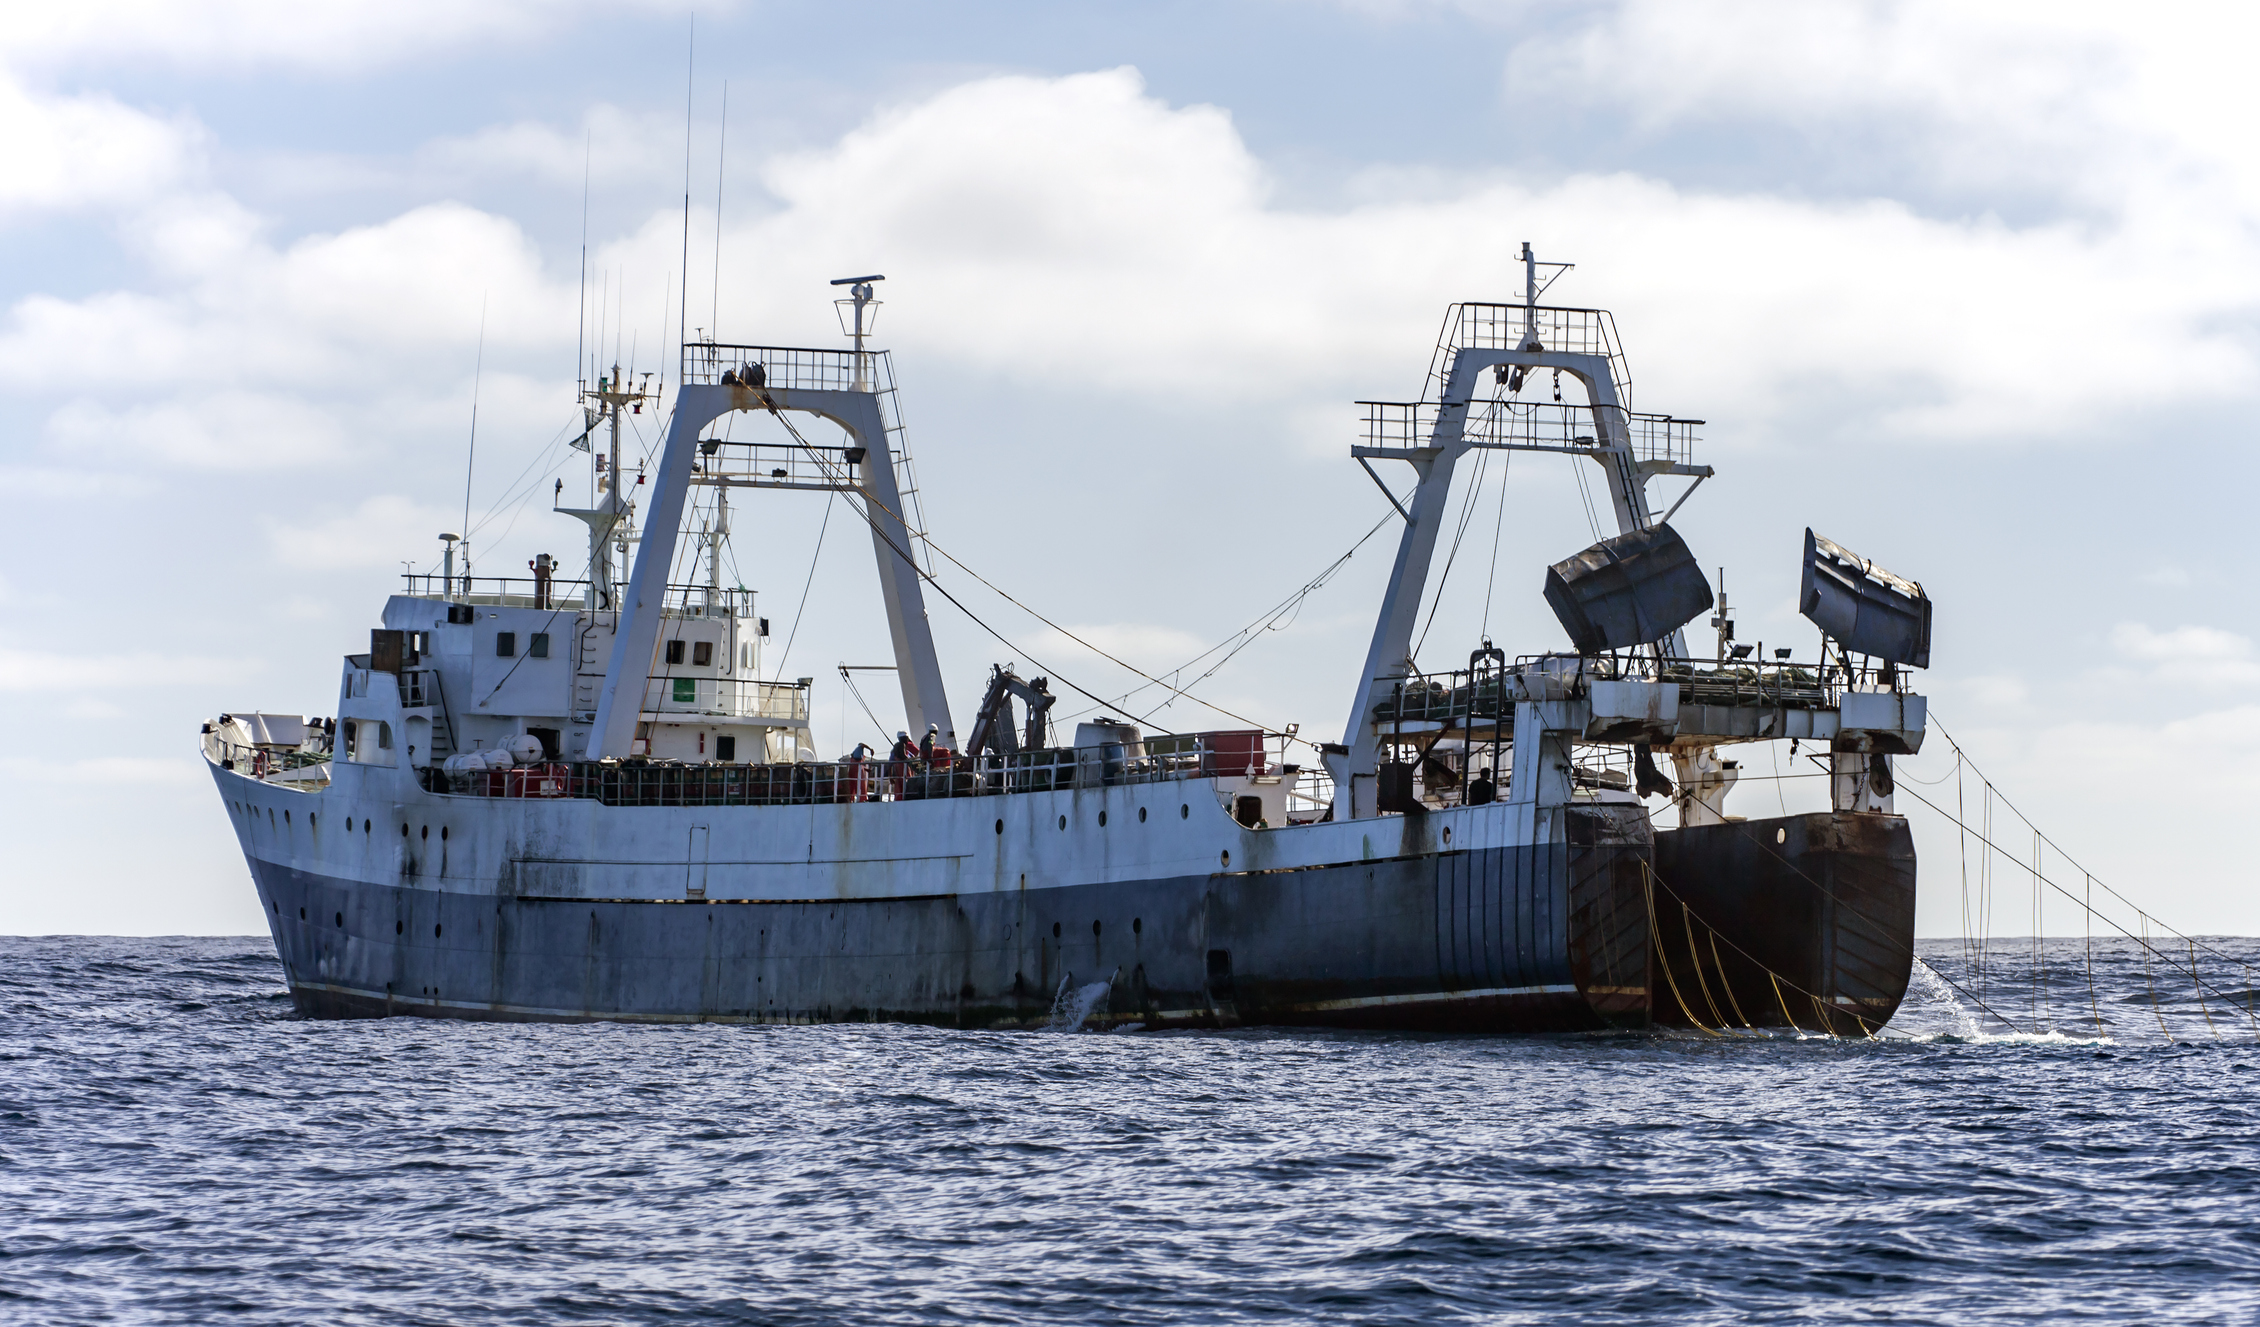 The National Geospatial-Intelligence Agency wants help to net illegal fishing operations